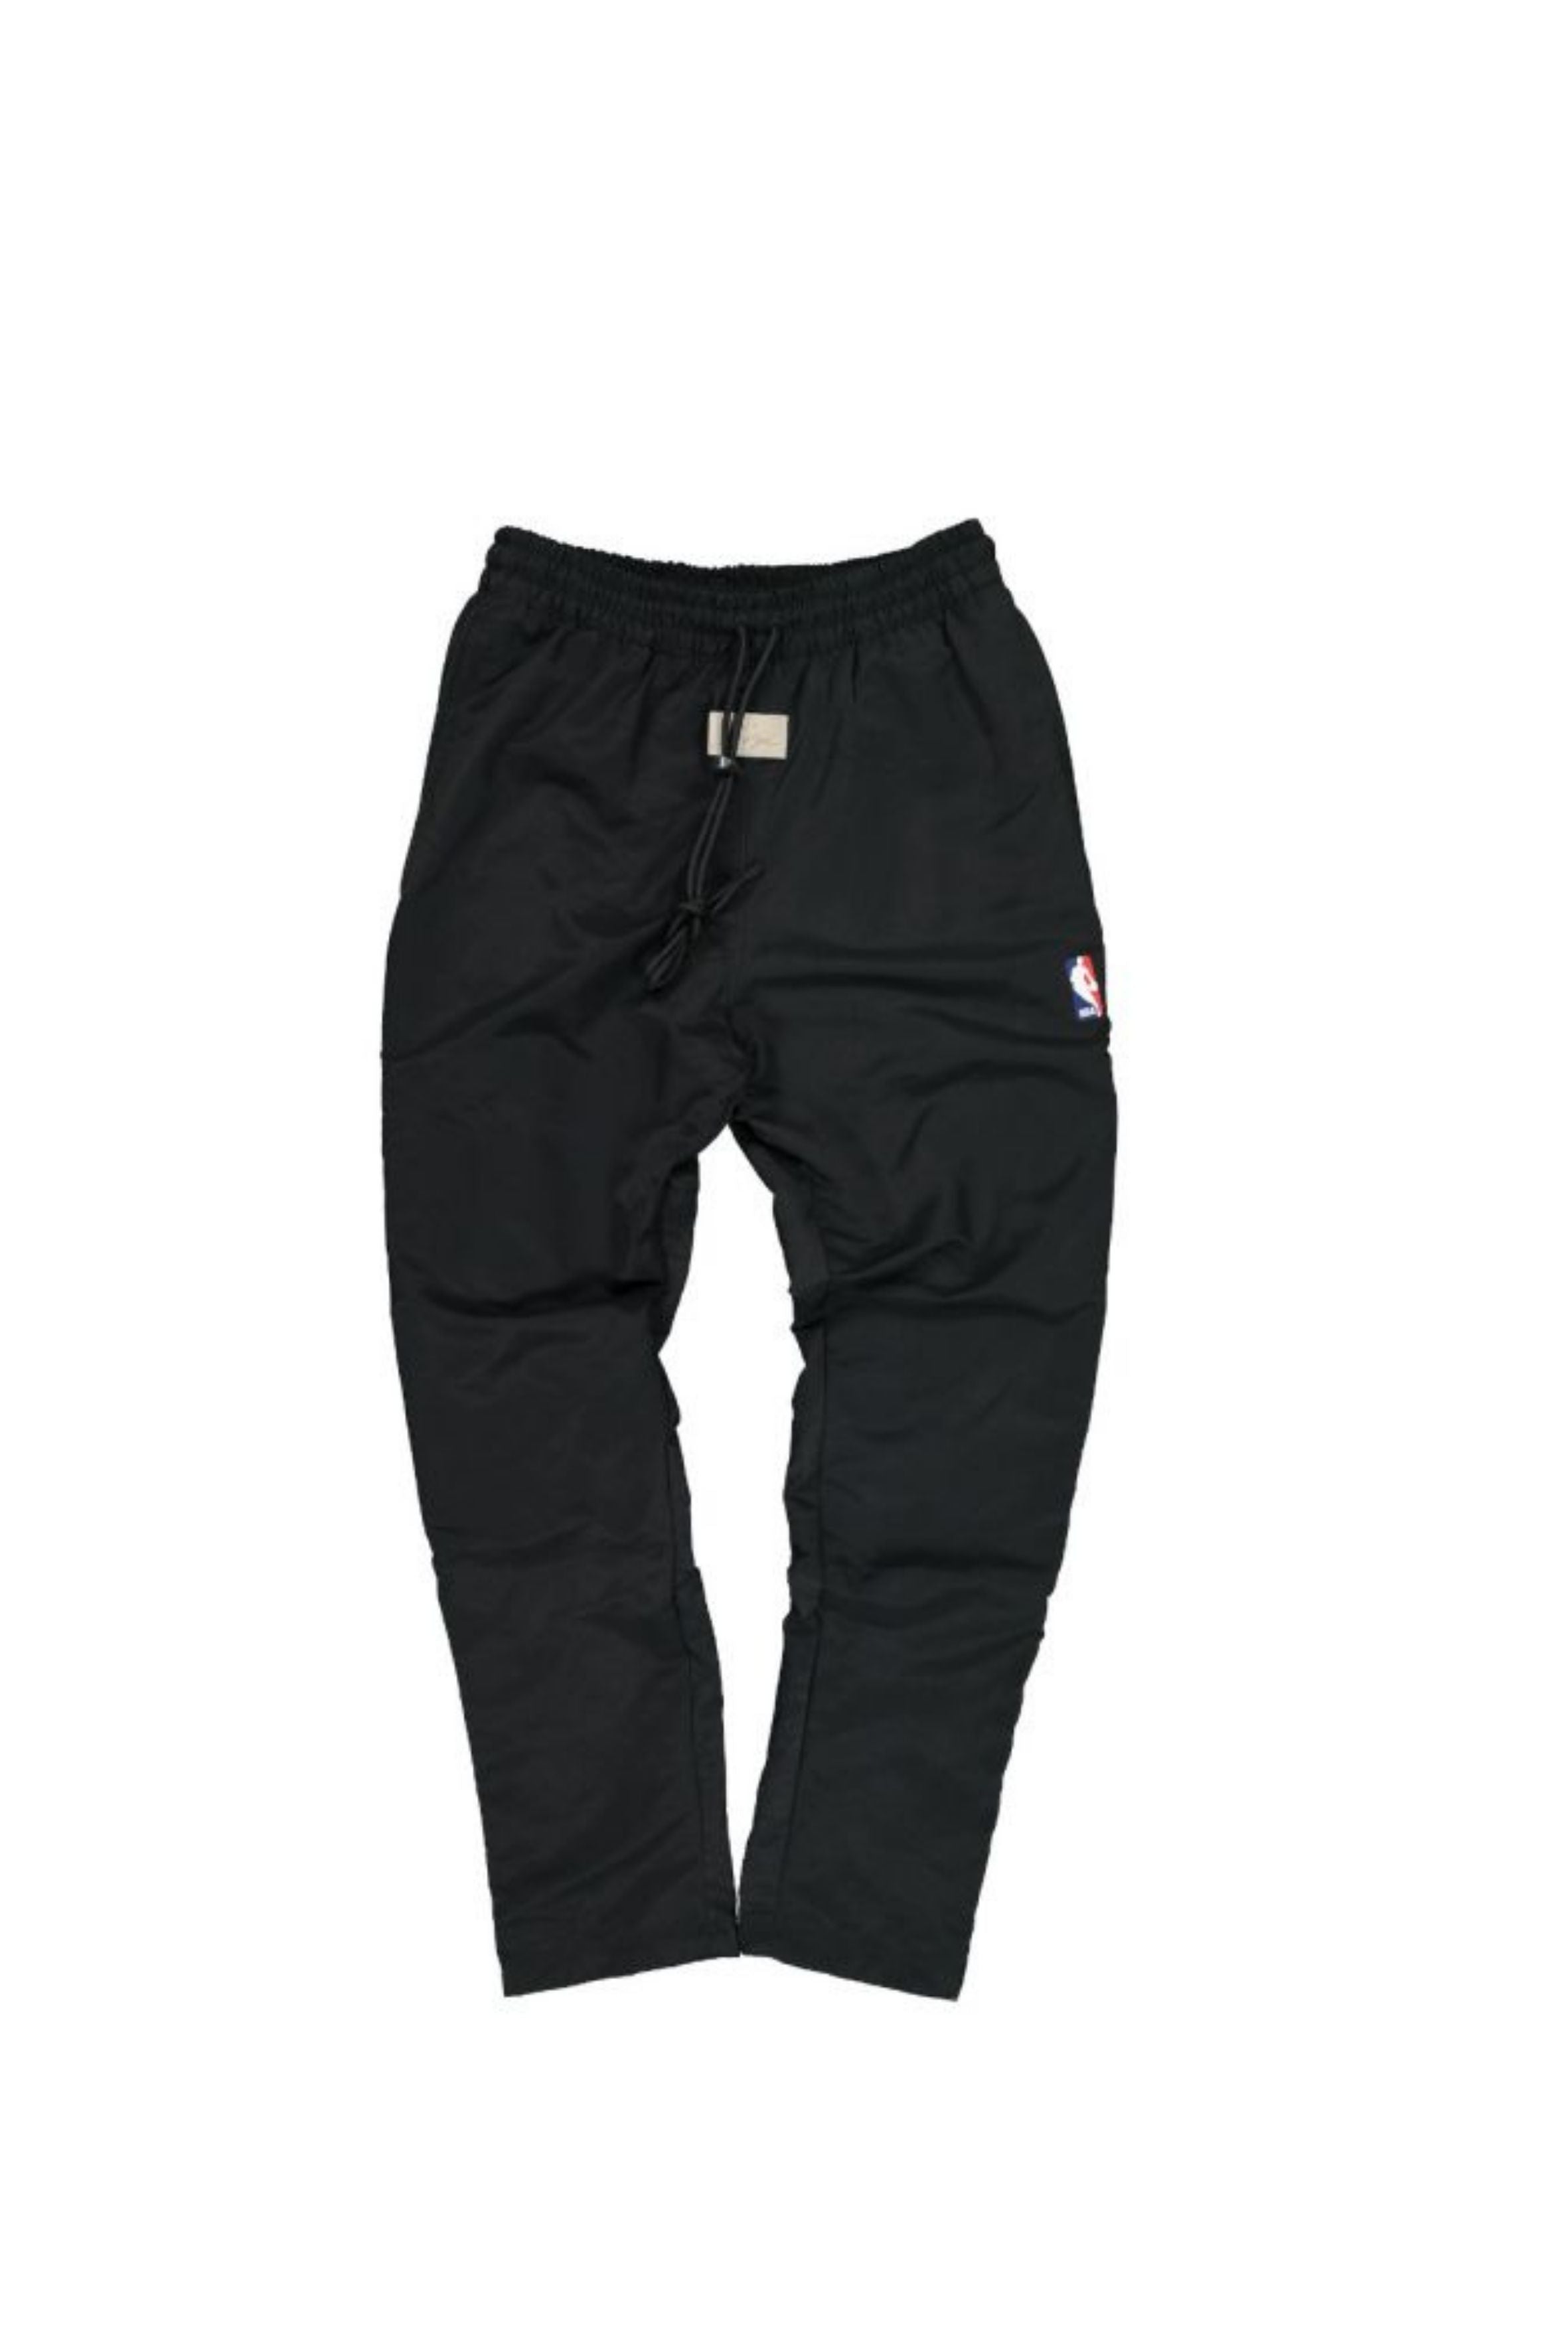 Fear of God x Nike Nylon Warm Up Pants Off Noir – Curated by Charbel